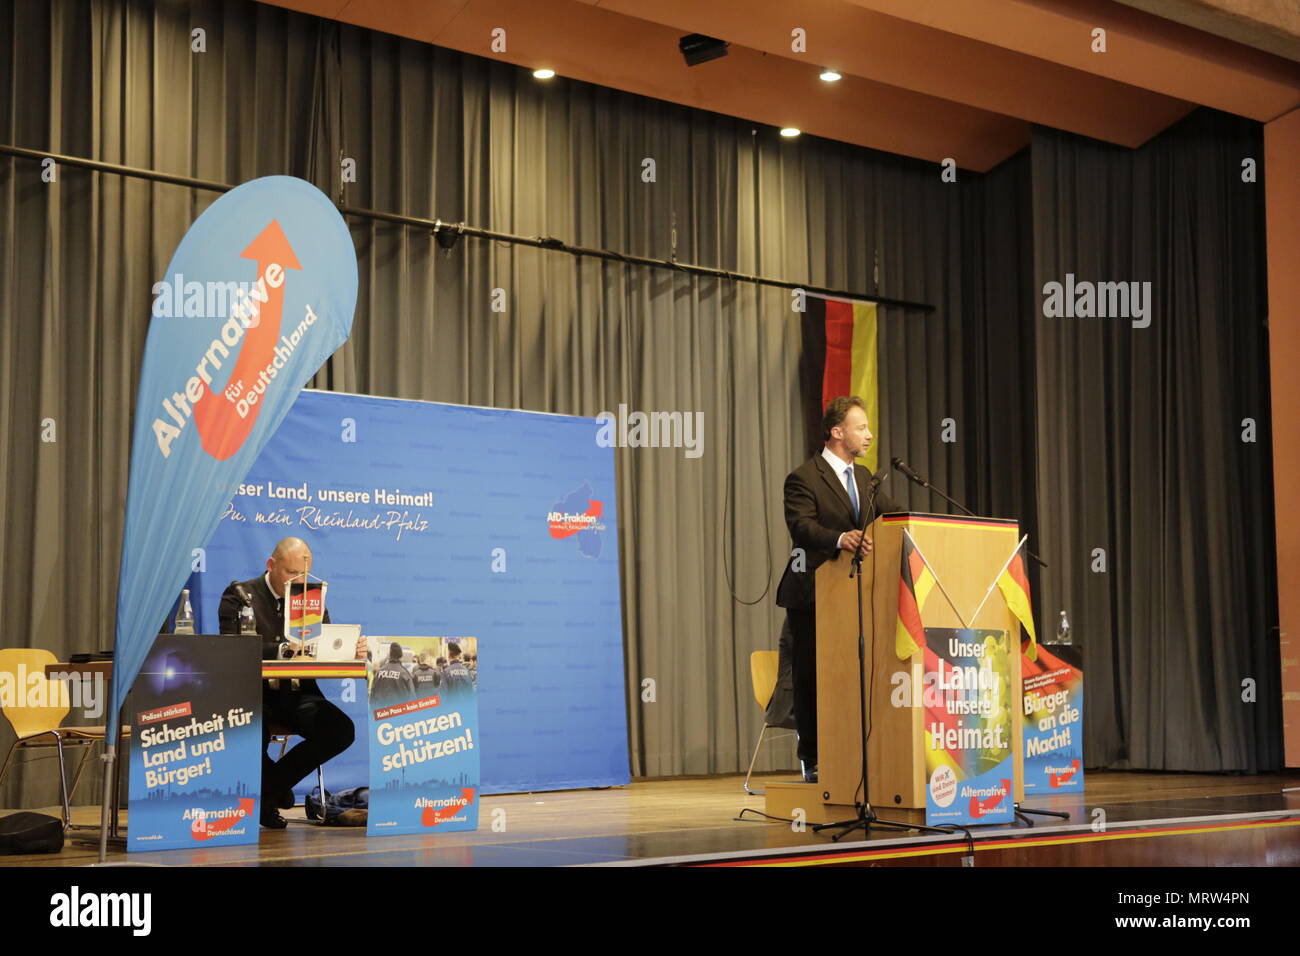 Jockgrim, Germany. 26th May, 2018. The parliamentary secretary of the AfD party in the Landtag (parliament) of Rhineland-Palatinate Jan Bollinger speaks on the podium. The parliamentary group of the right-wing populist AfD (Alternative for Germany) party of Rhineland-Palatinate celebrated the 2nd anniversary of their entry into the Rhineland-Palatinate state parliament in the 2016 state election in the South Palatinate city of Jockgrim. A counter-protest was organised by several groups outside the venue. Credit: Michael Debets/Pacific Pres/Alamy Live News Stock Photo